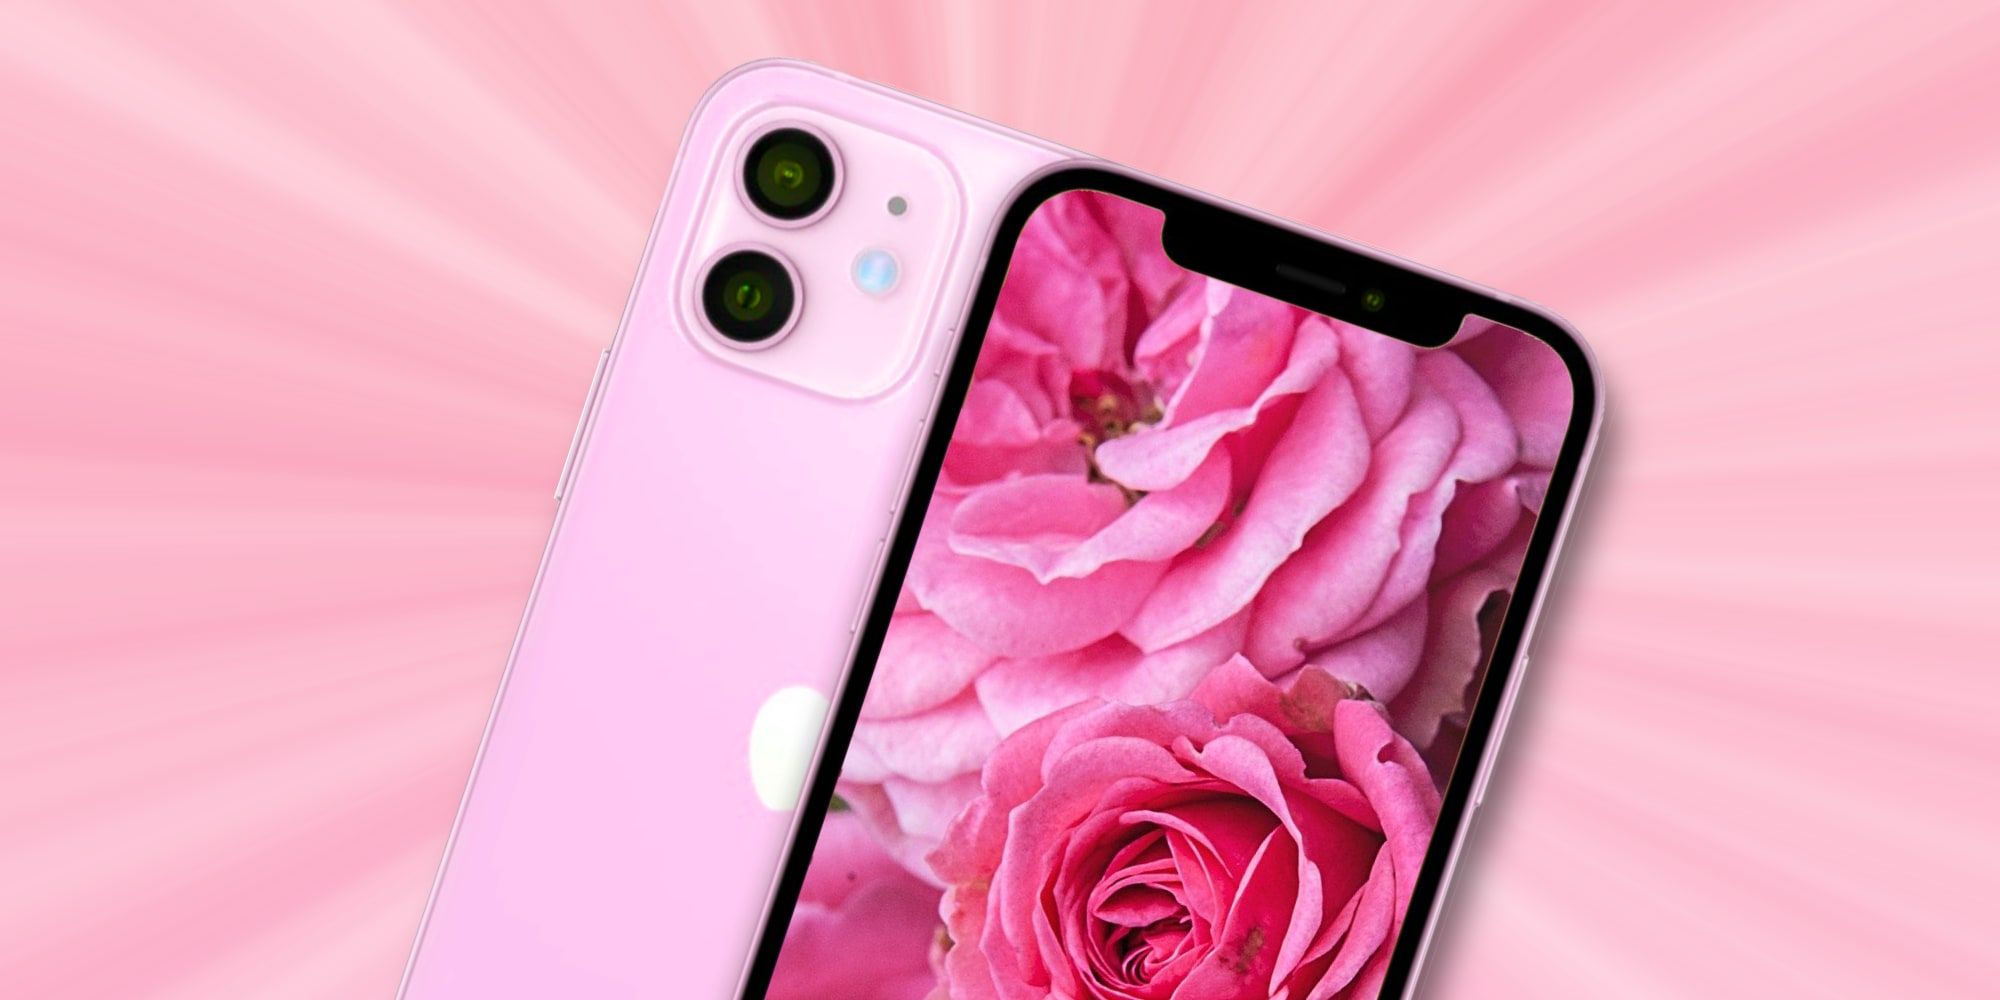 Apple iPhone 12 Rendered In Pink